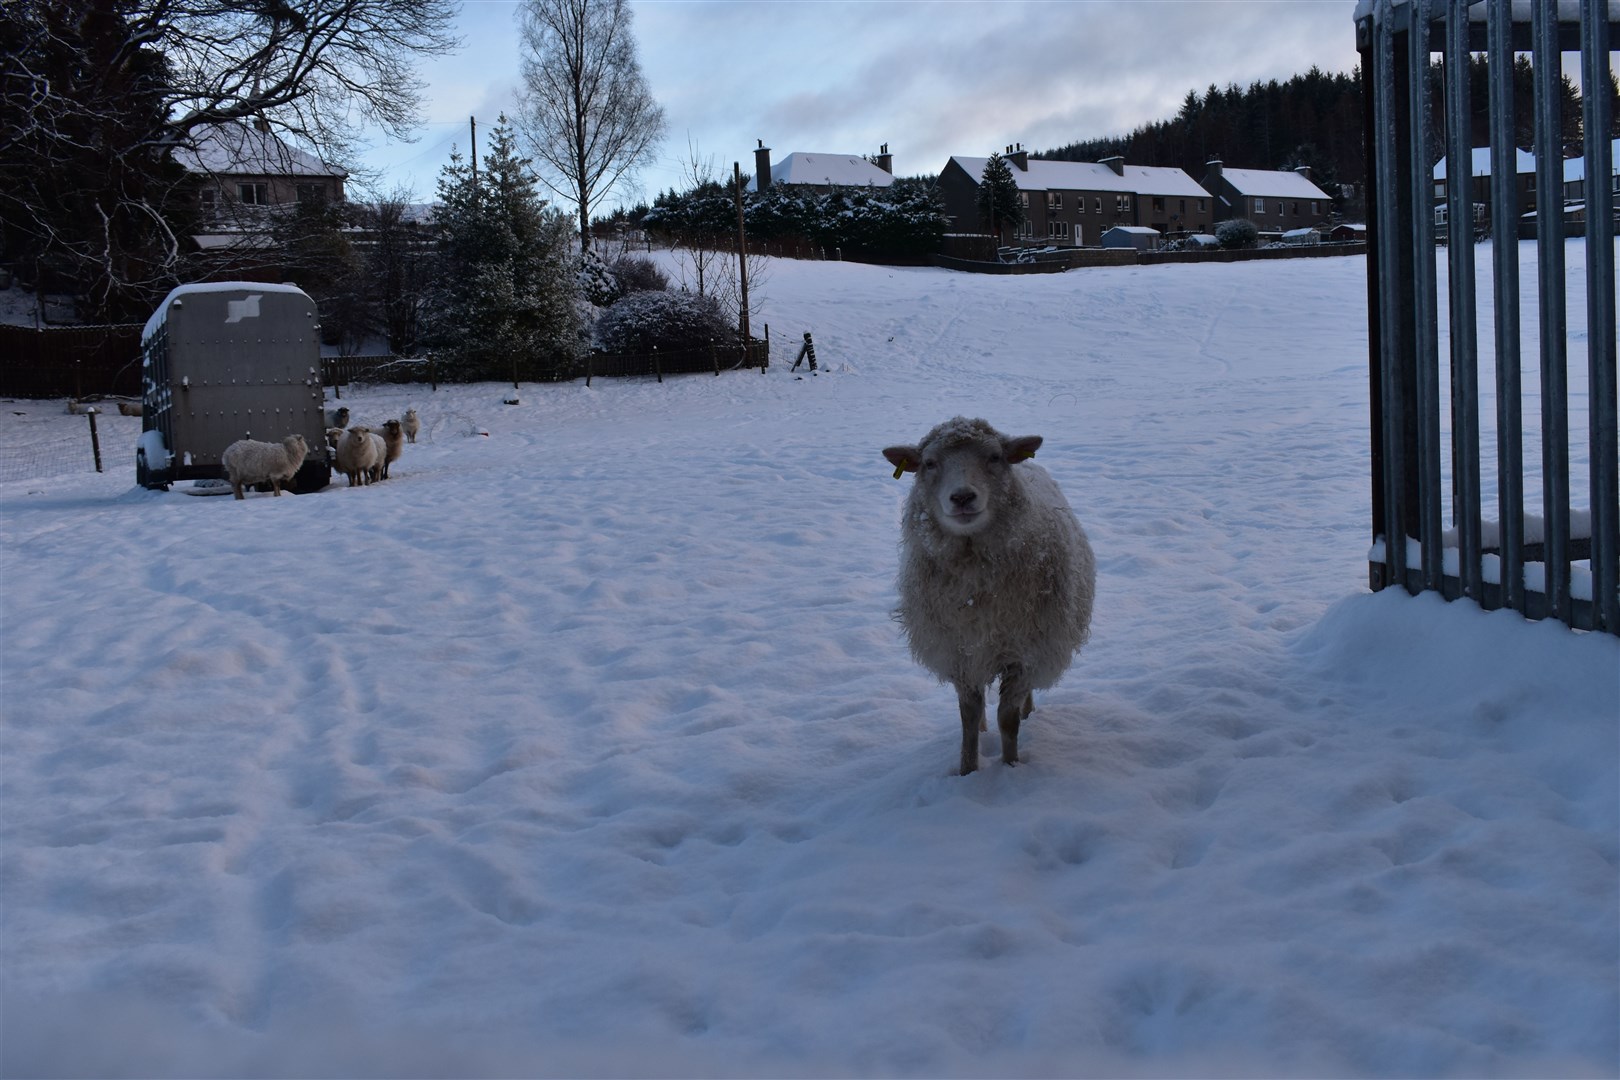 Some hardy locals in Aberlour met the snow with a smile.